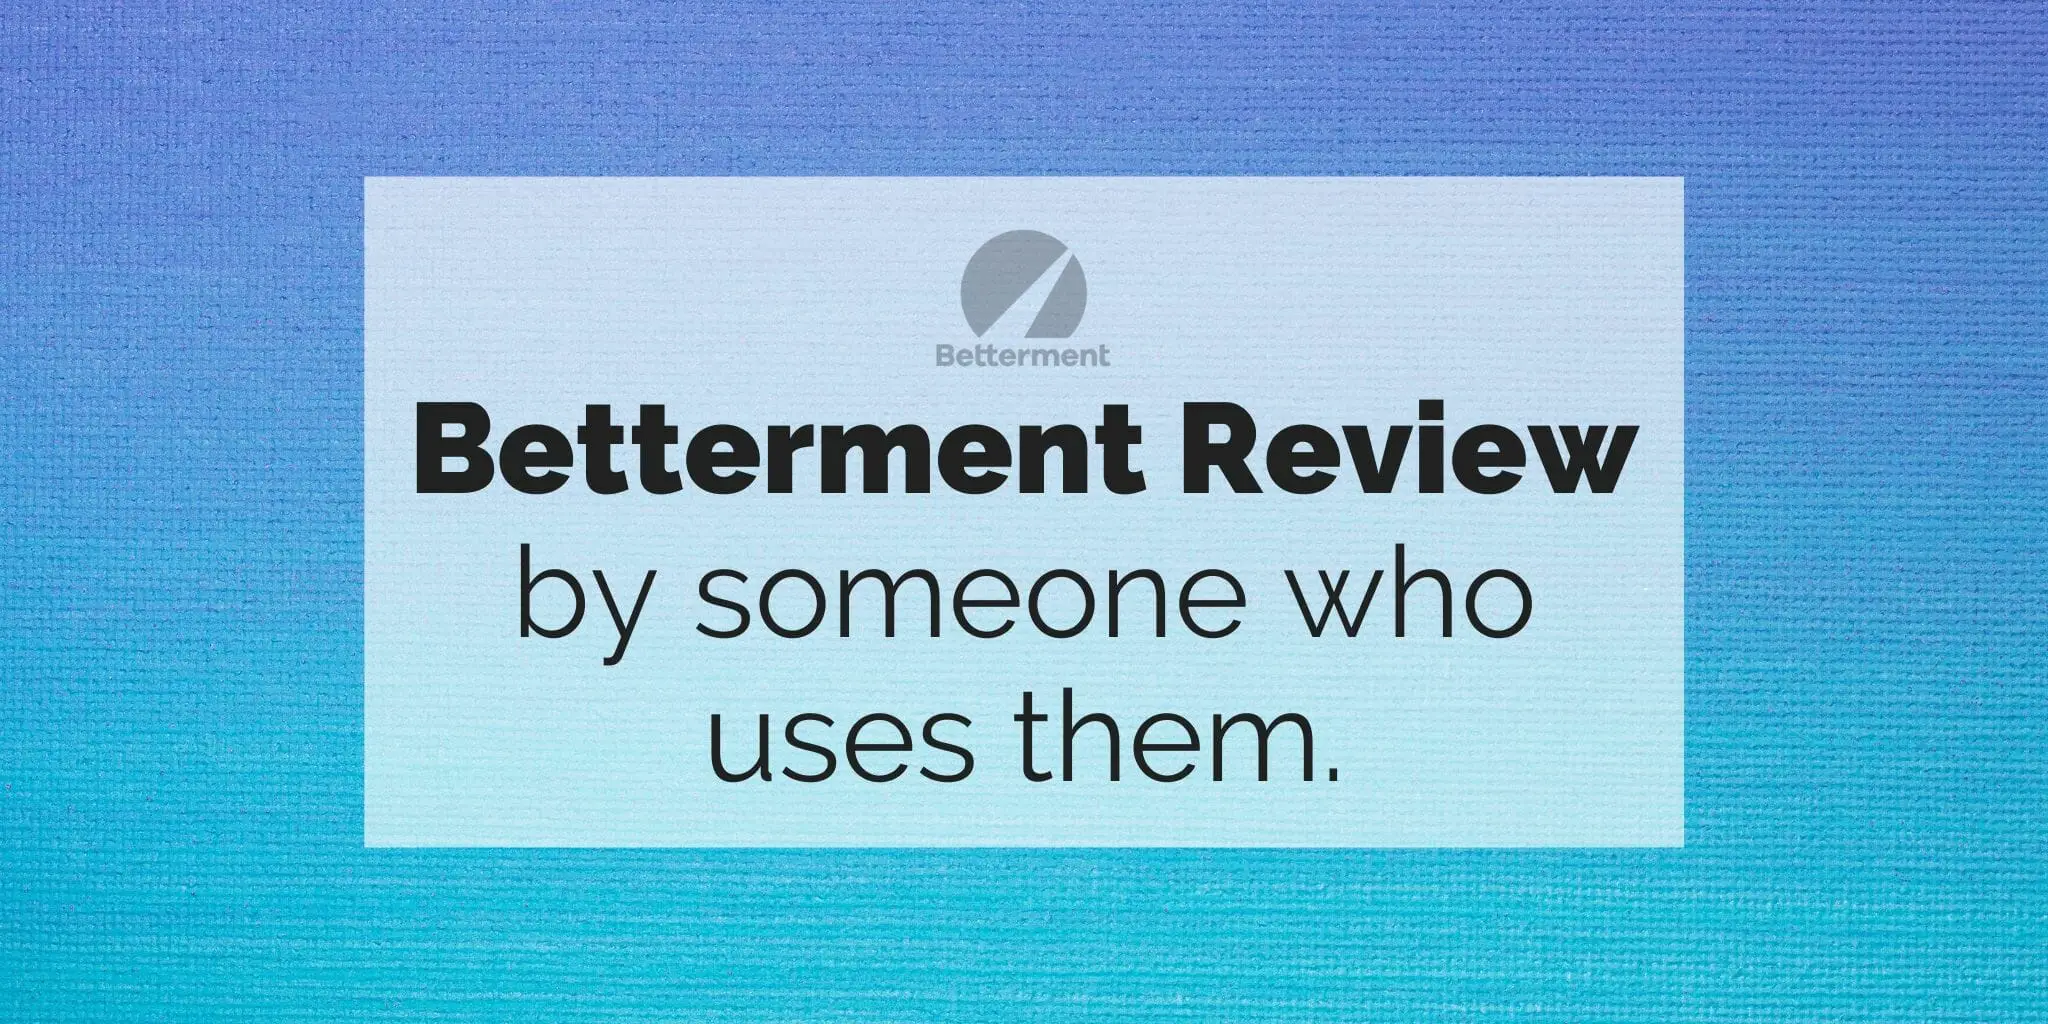 Image reads: "Betterment Review by someone who uses them" over a blue gradient background with the Betterment logo on it.